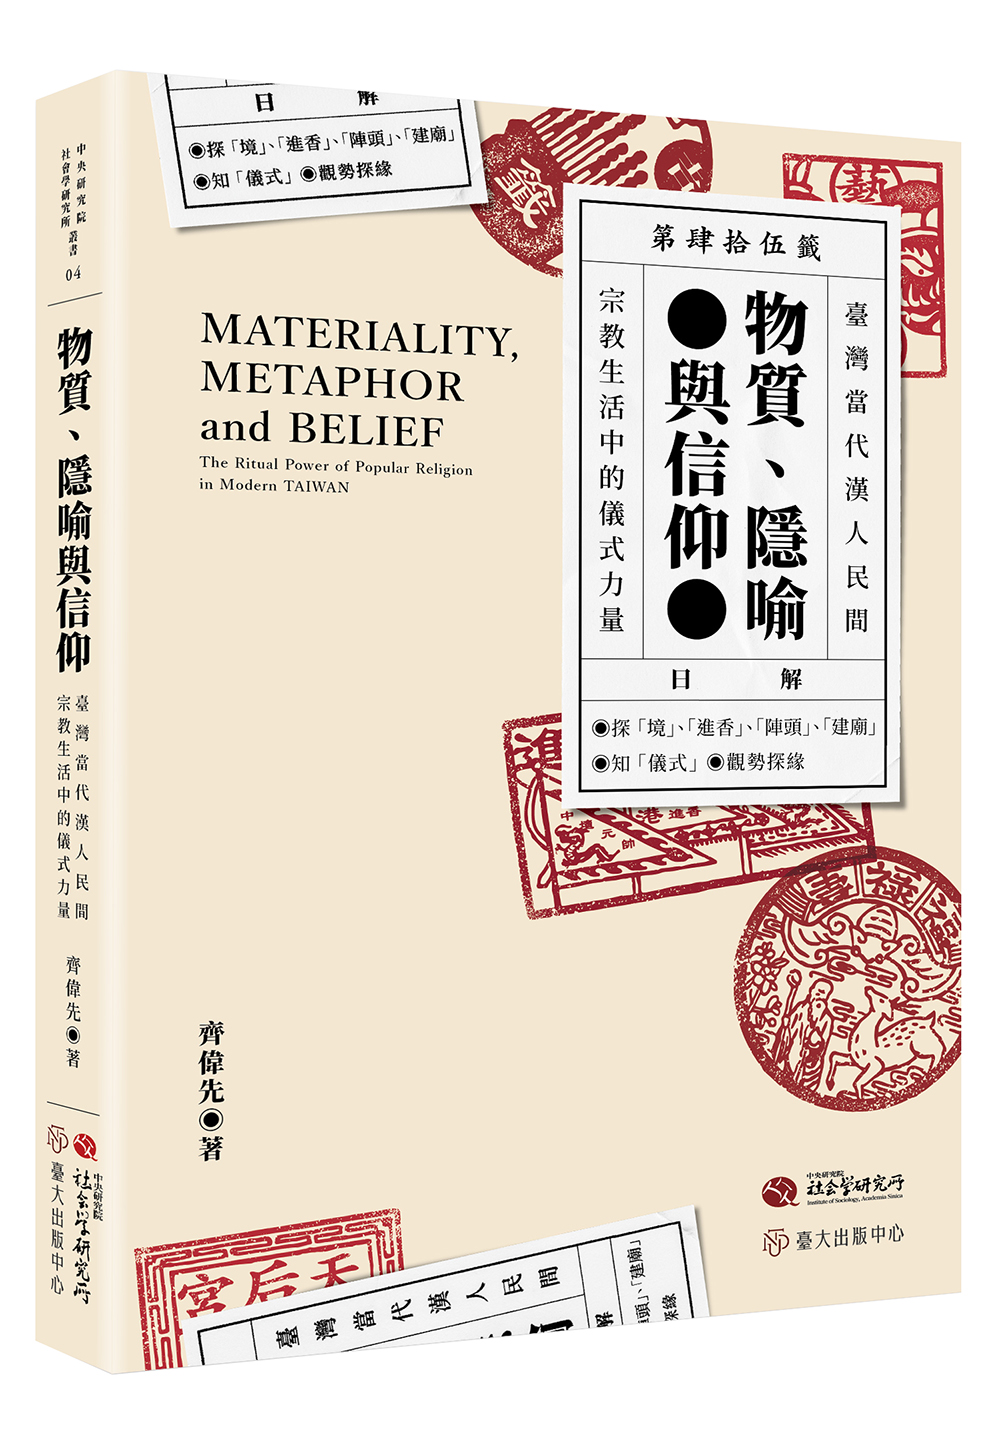 Materiality, Metaphor and Belief: The Ritual Power of Popular Religion in Modern Taiwan